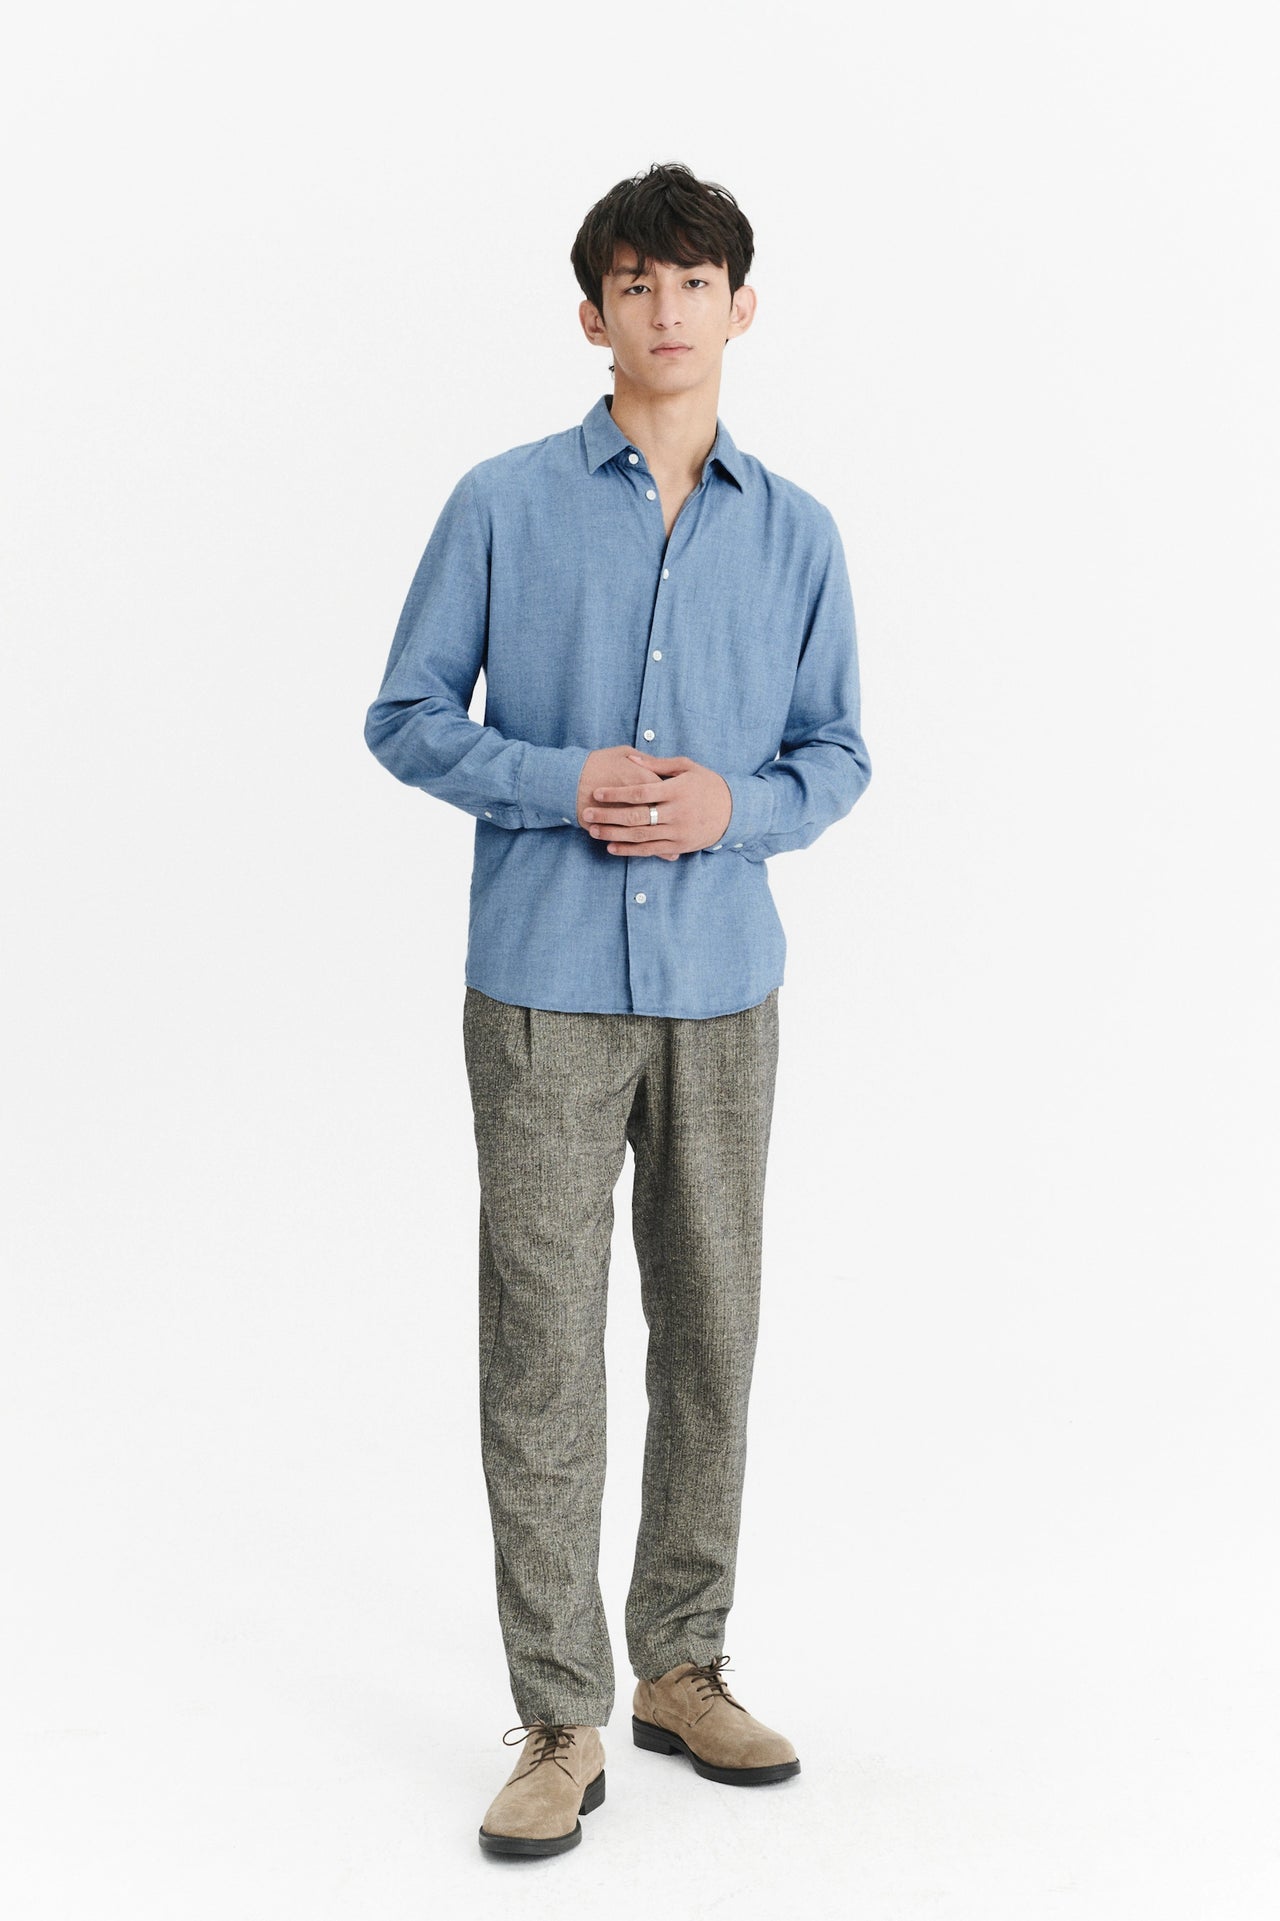 Feel Good Shirt in a Sea Blue Utterly Soft and Silky Italian Lyocell and Cotton Flannel by Albini